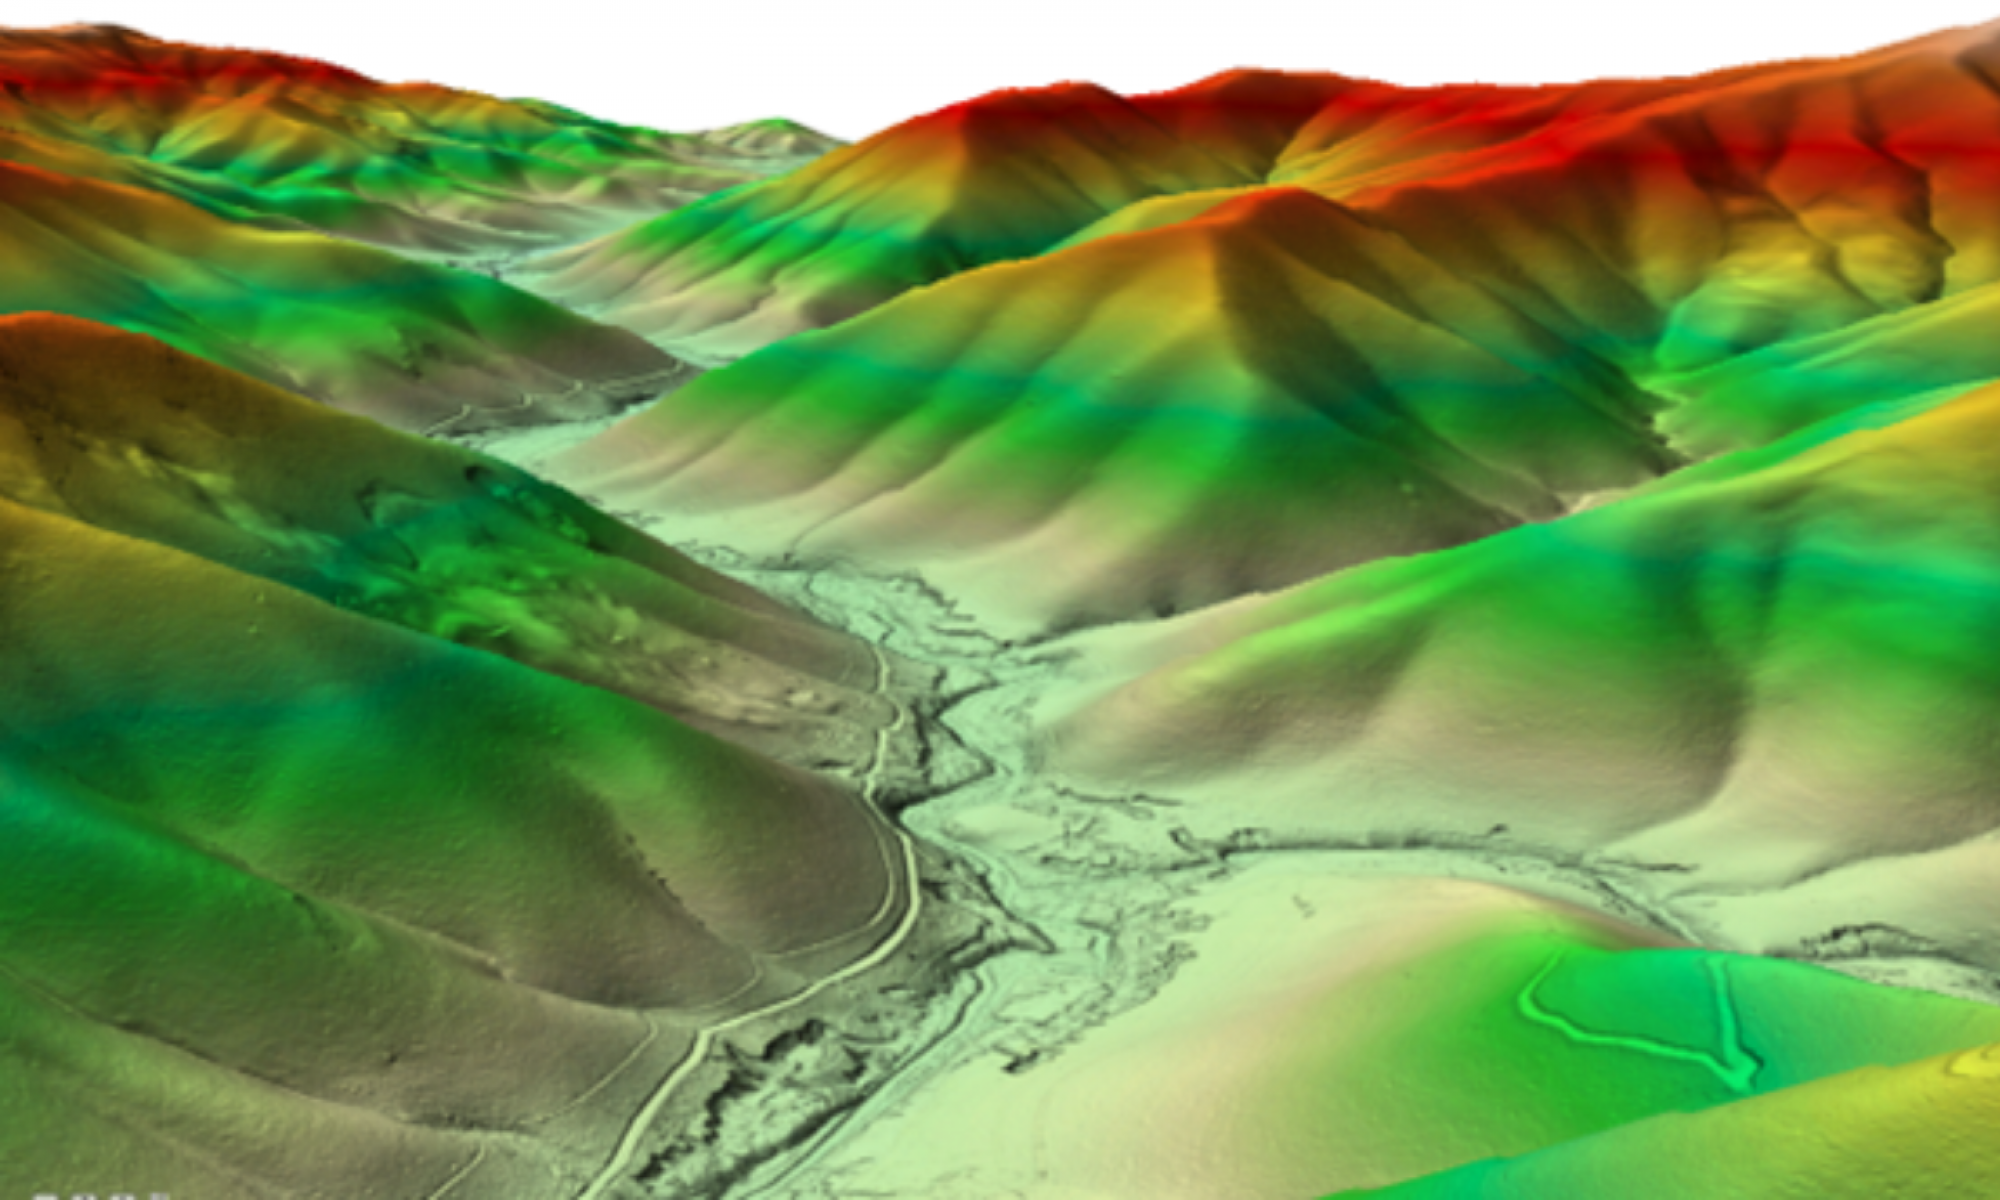 A Digital Elevation model of the Buckland River Valley genereated through LiDAR capture displaying the height of surfaces through shades of green, yellow and red.